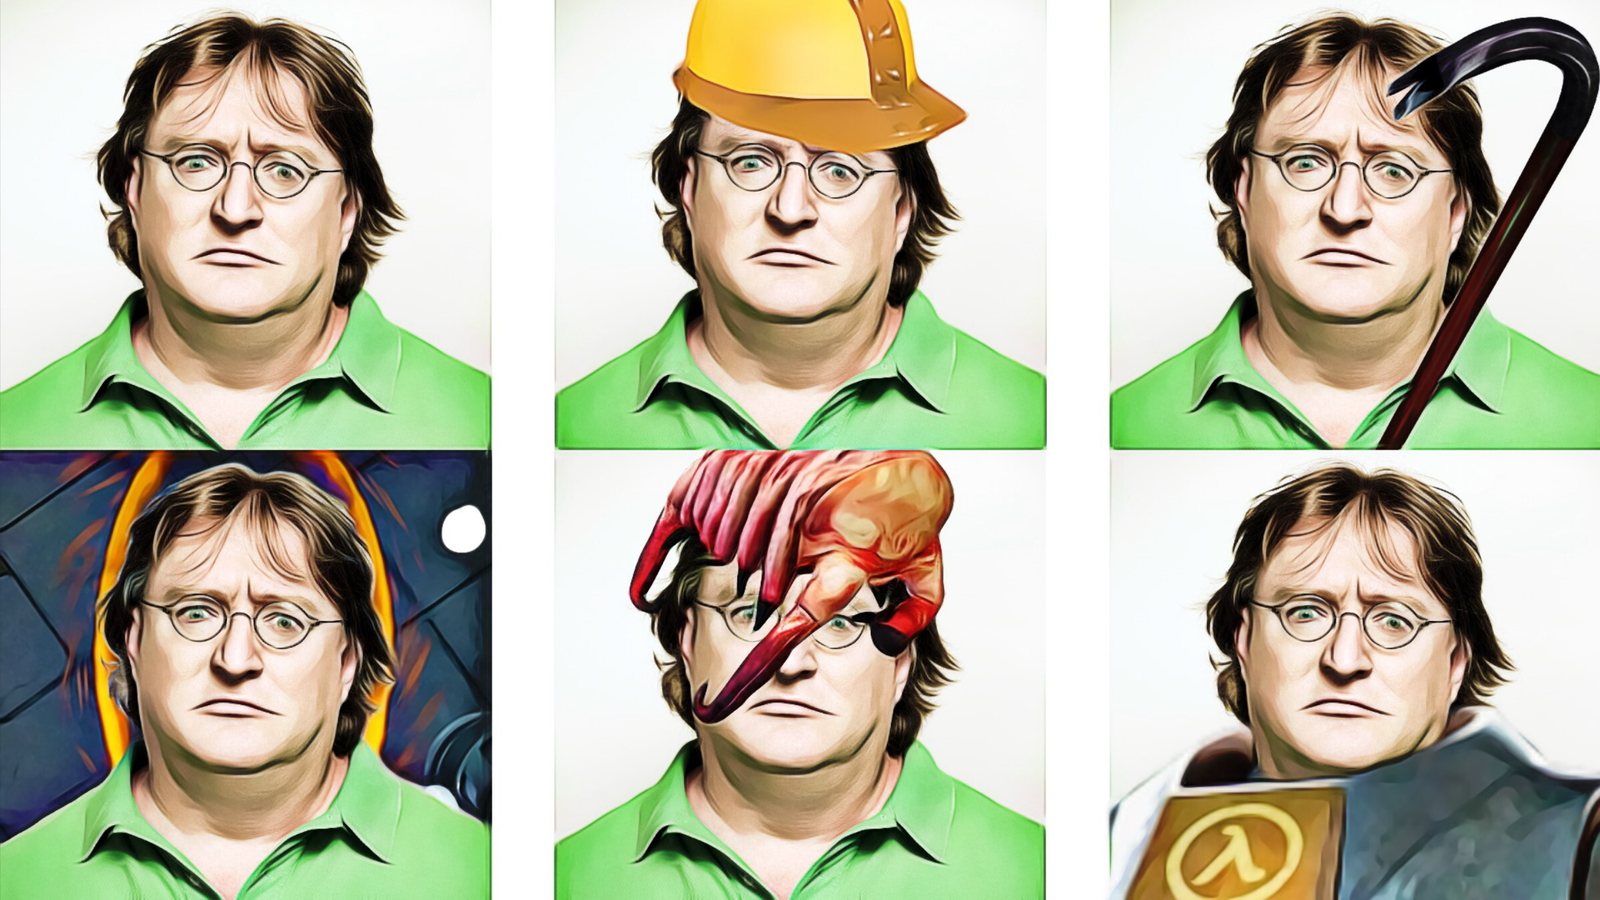 Valve's Gabe Newell explains why Steam has banned NFT games - Dexerto